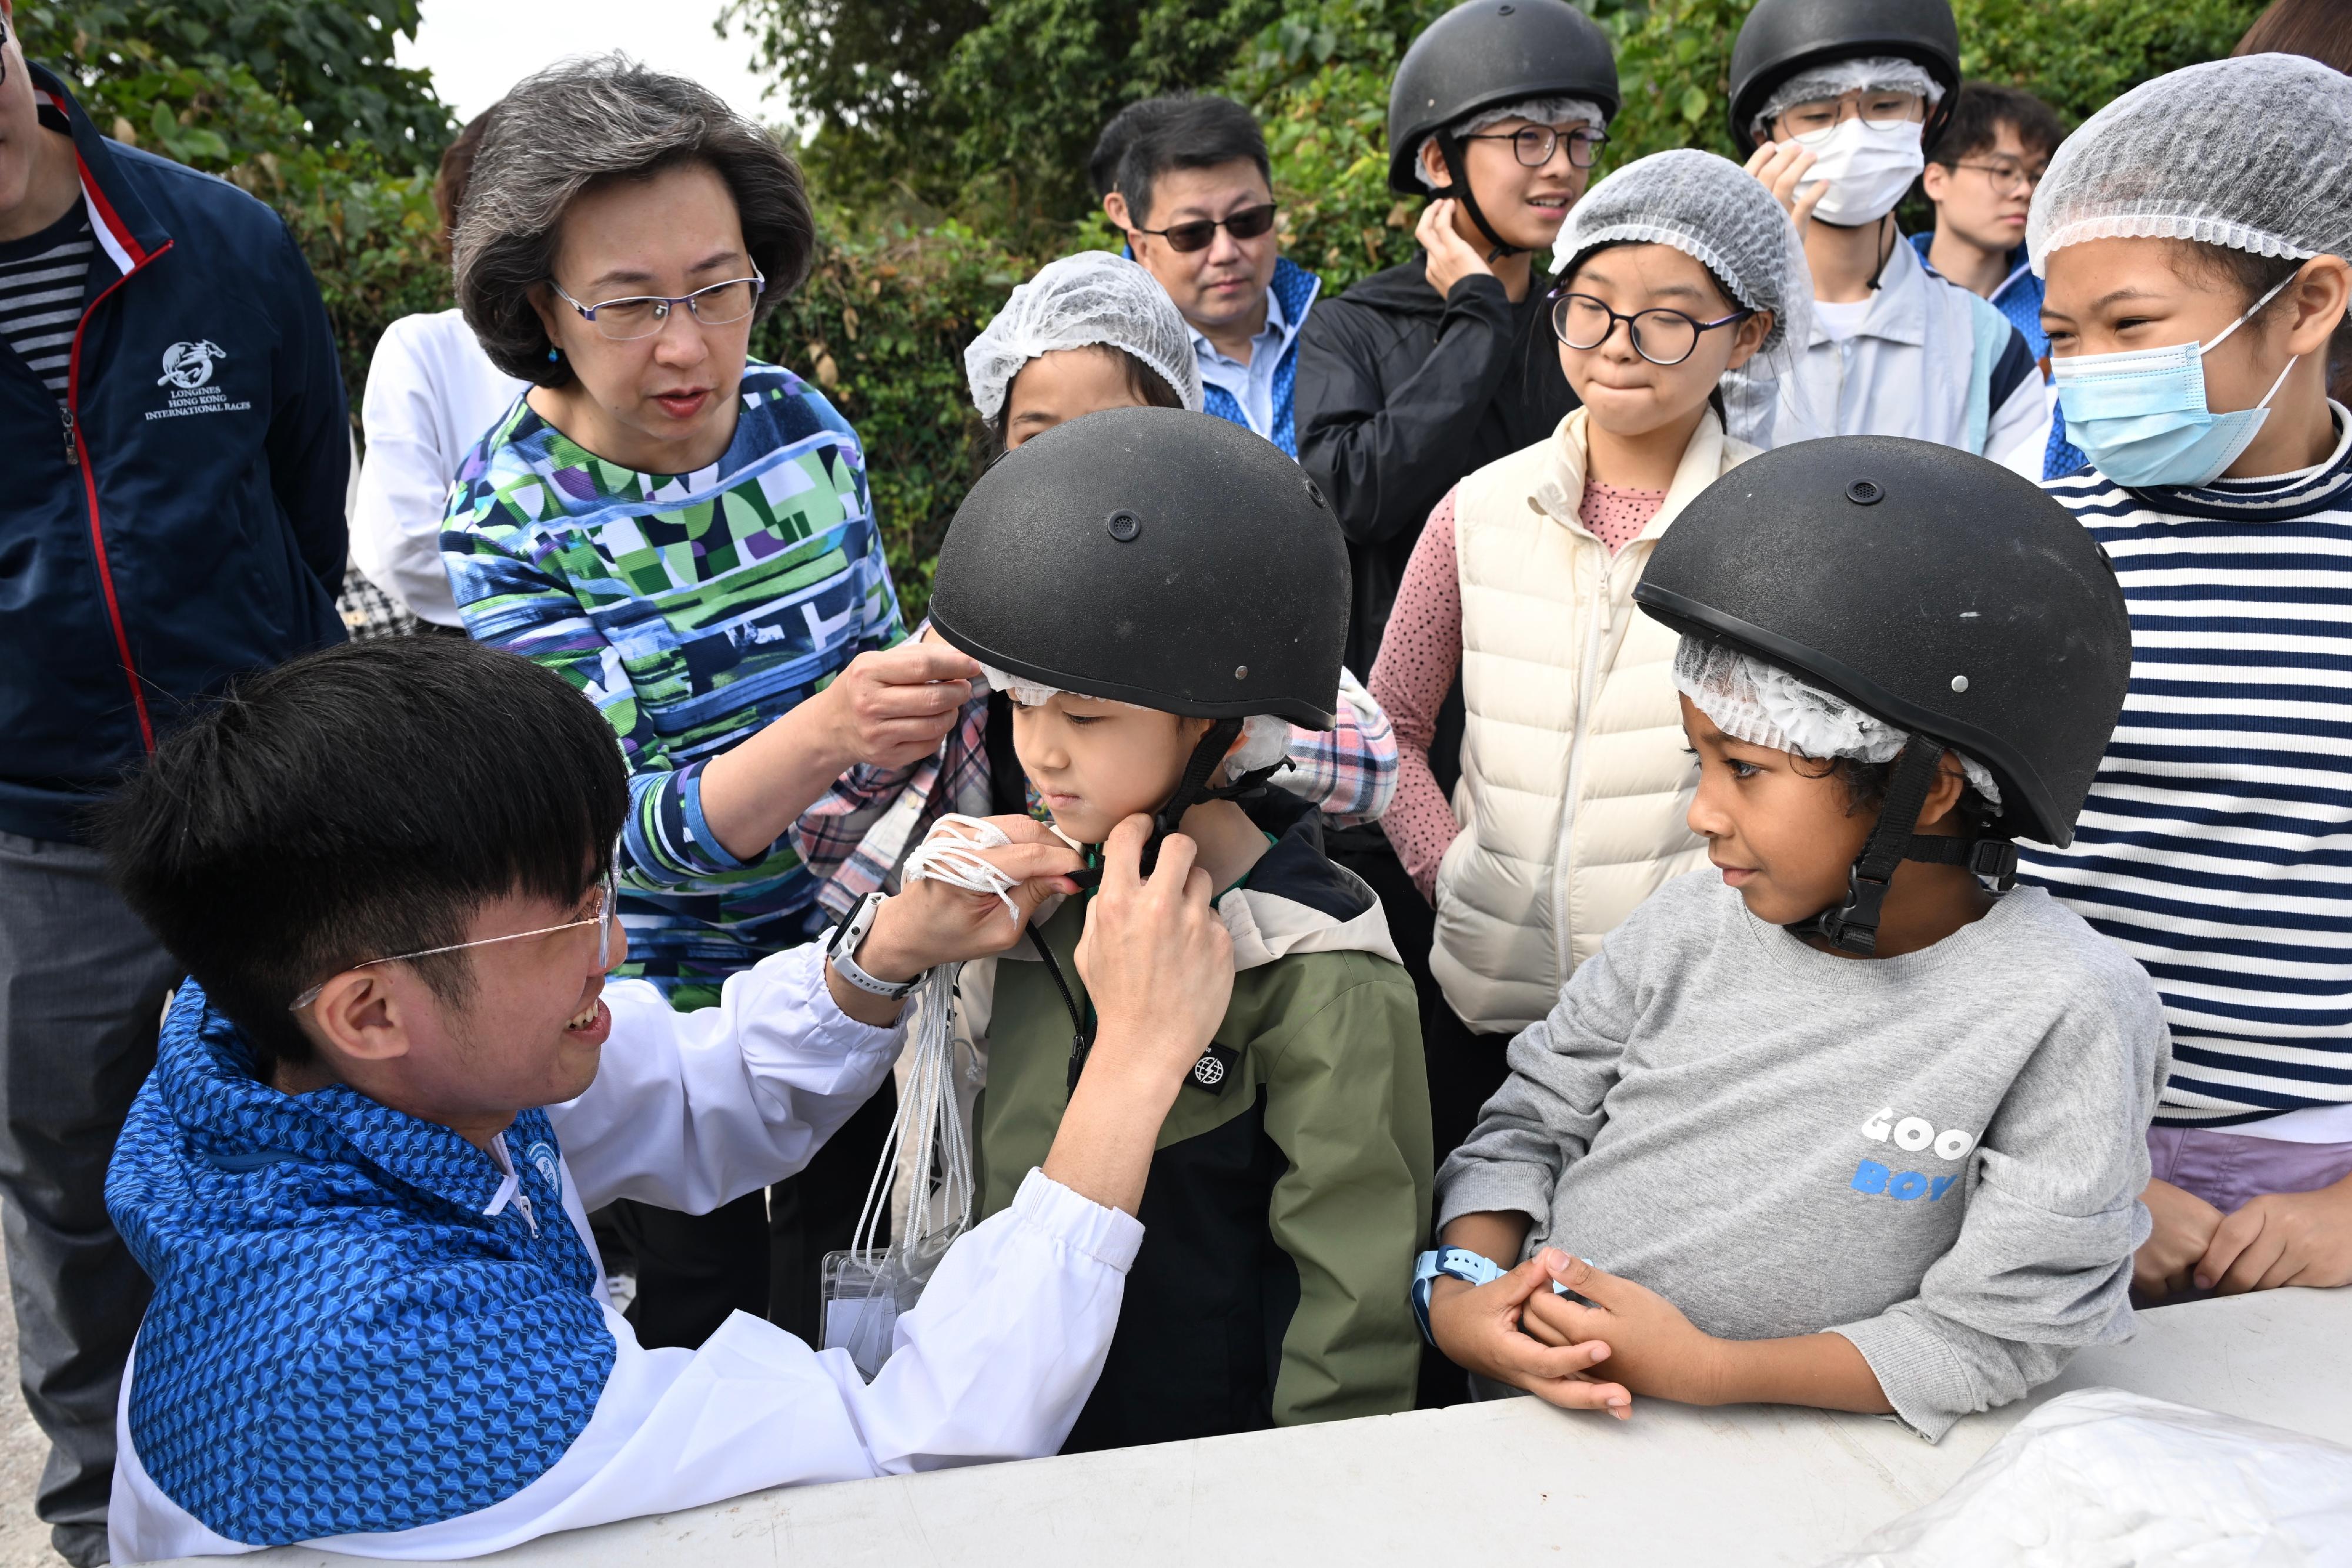 About 20 children from grassroots families today (January 20) visited the Tuen Mun Public Riding School in the company of civil service volunteers to sample the fun of horse riding. Photo shows the Secretary for the Civil Service, Mrs Ingrid Yeung (second left), and volunteers from the Water Supplies Department helping a child get ready before the ride.